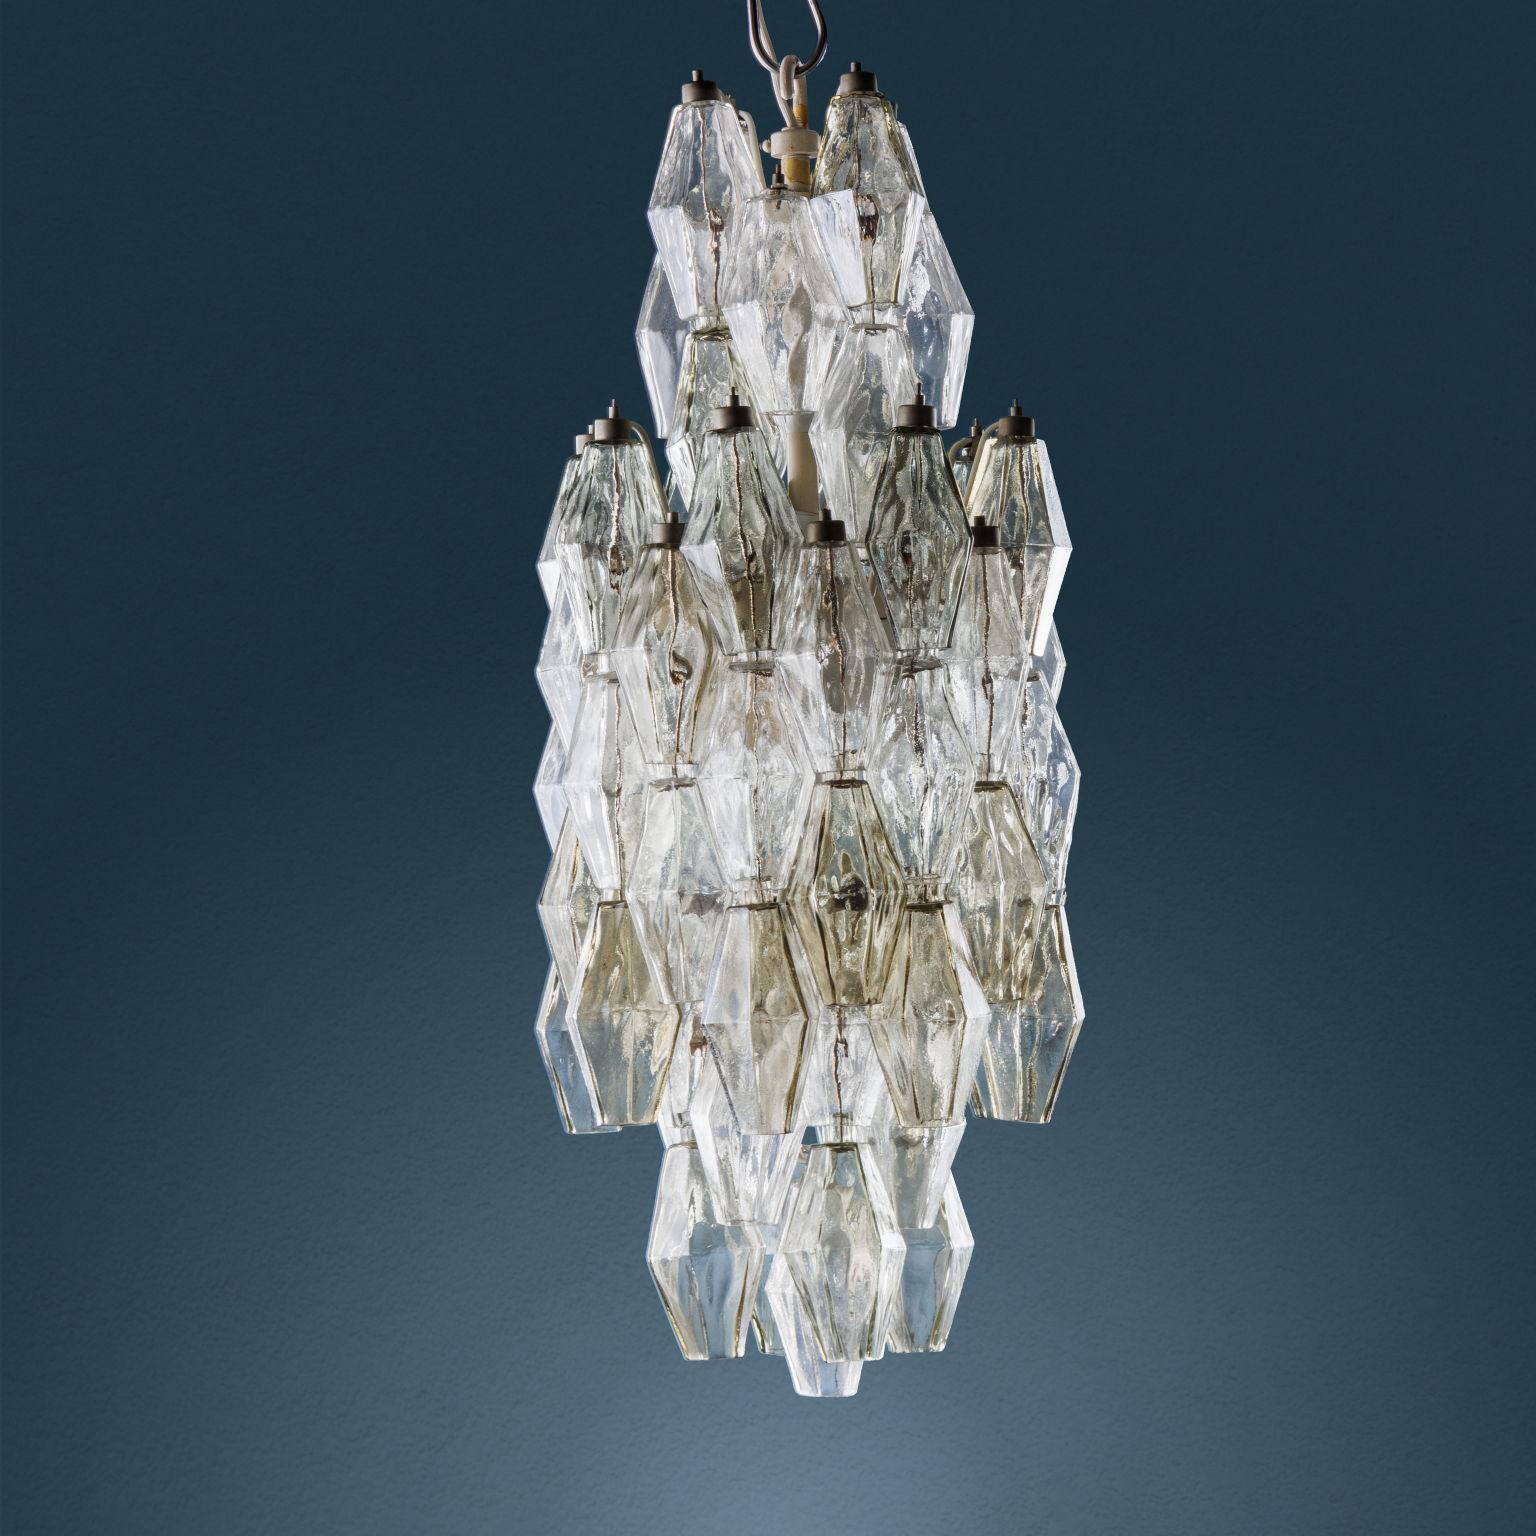 Pendant lamp designed by Carlo Scarpa and produced by Venini from the Poliedri series. Metal frame and Murano glass elements, 1960s. In very good original condition. 